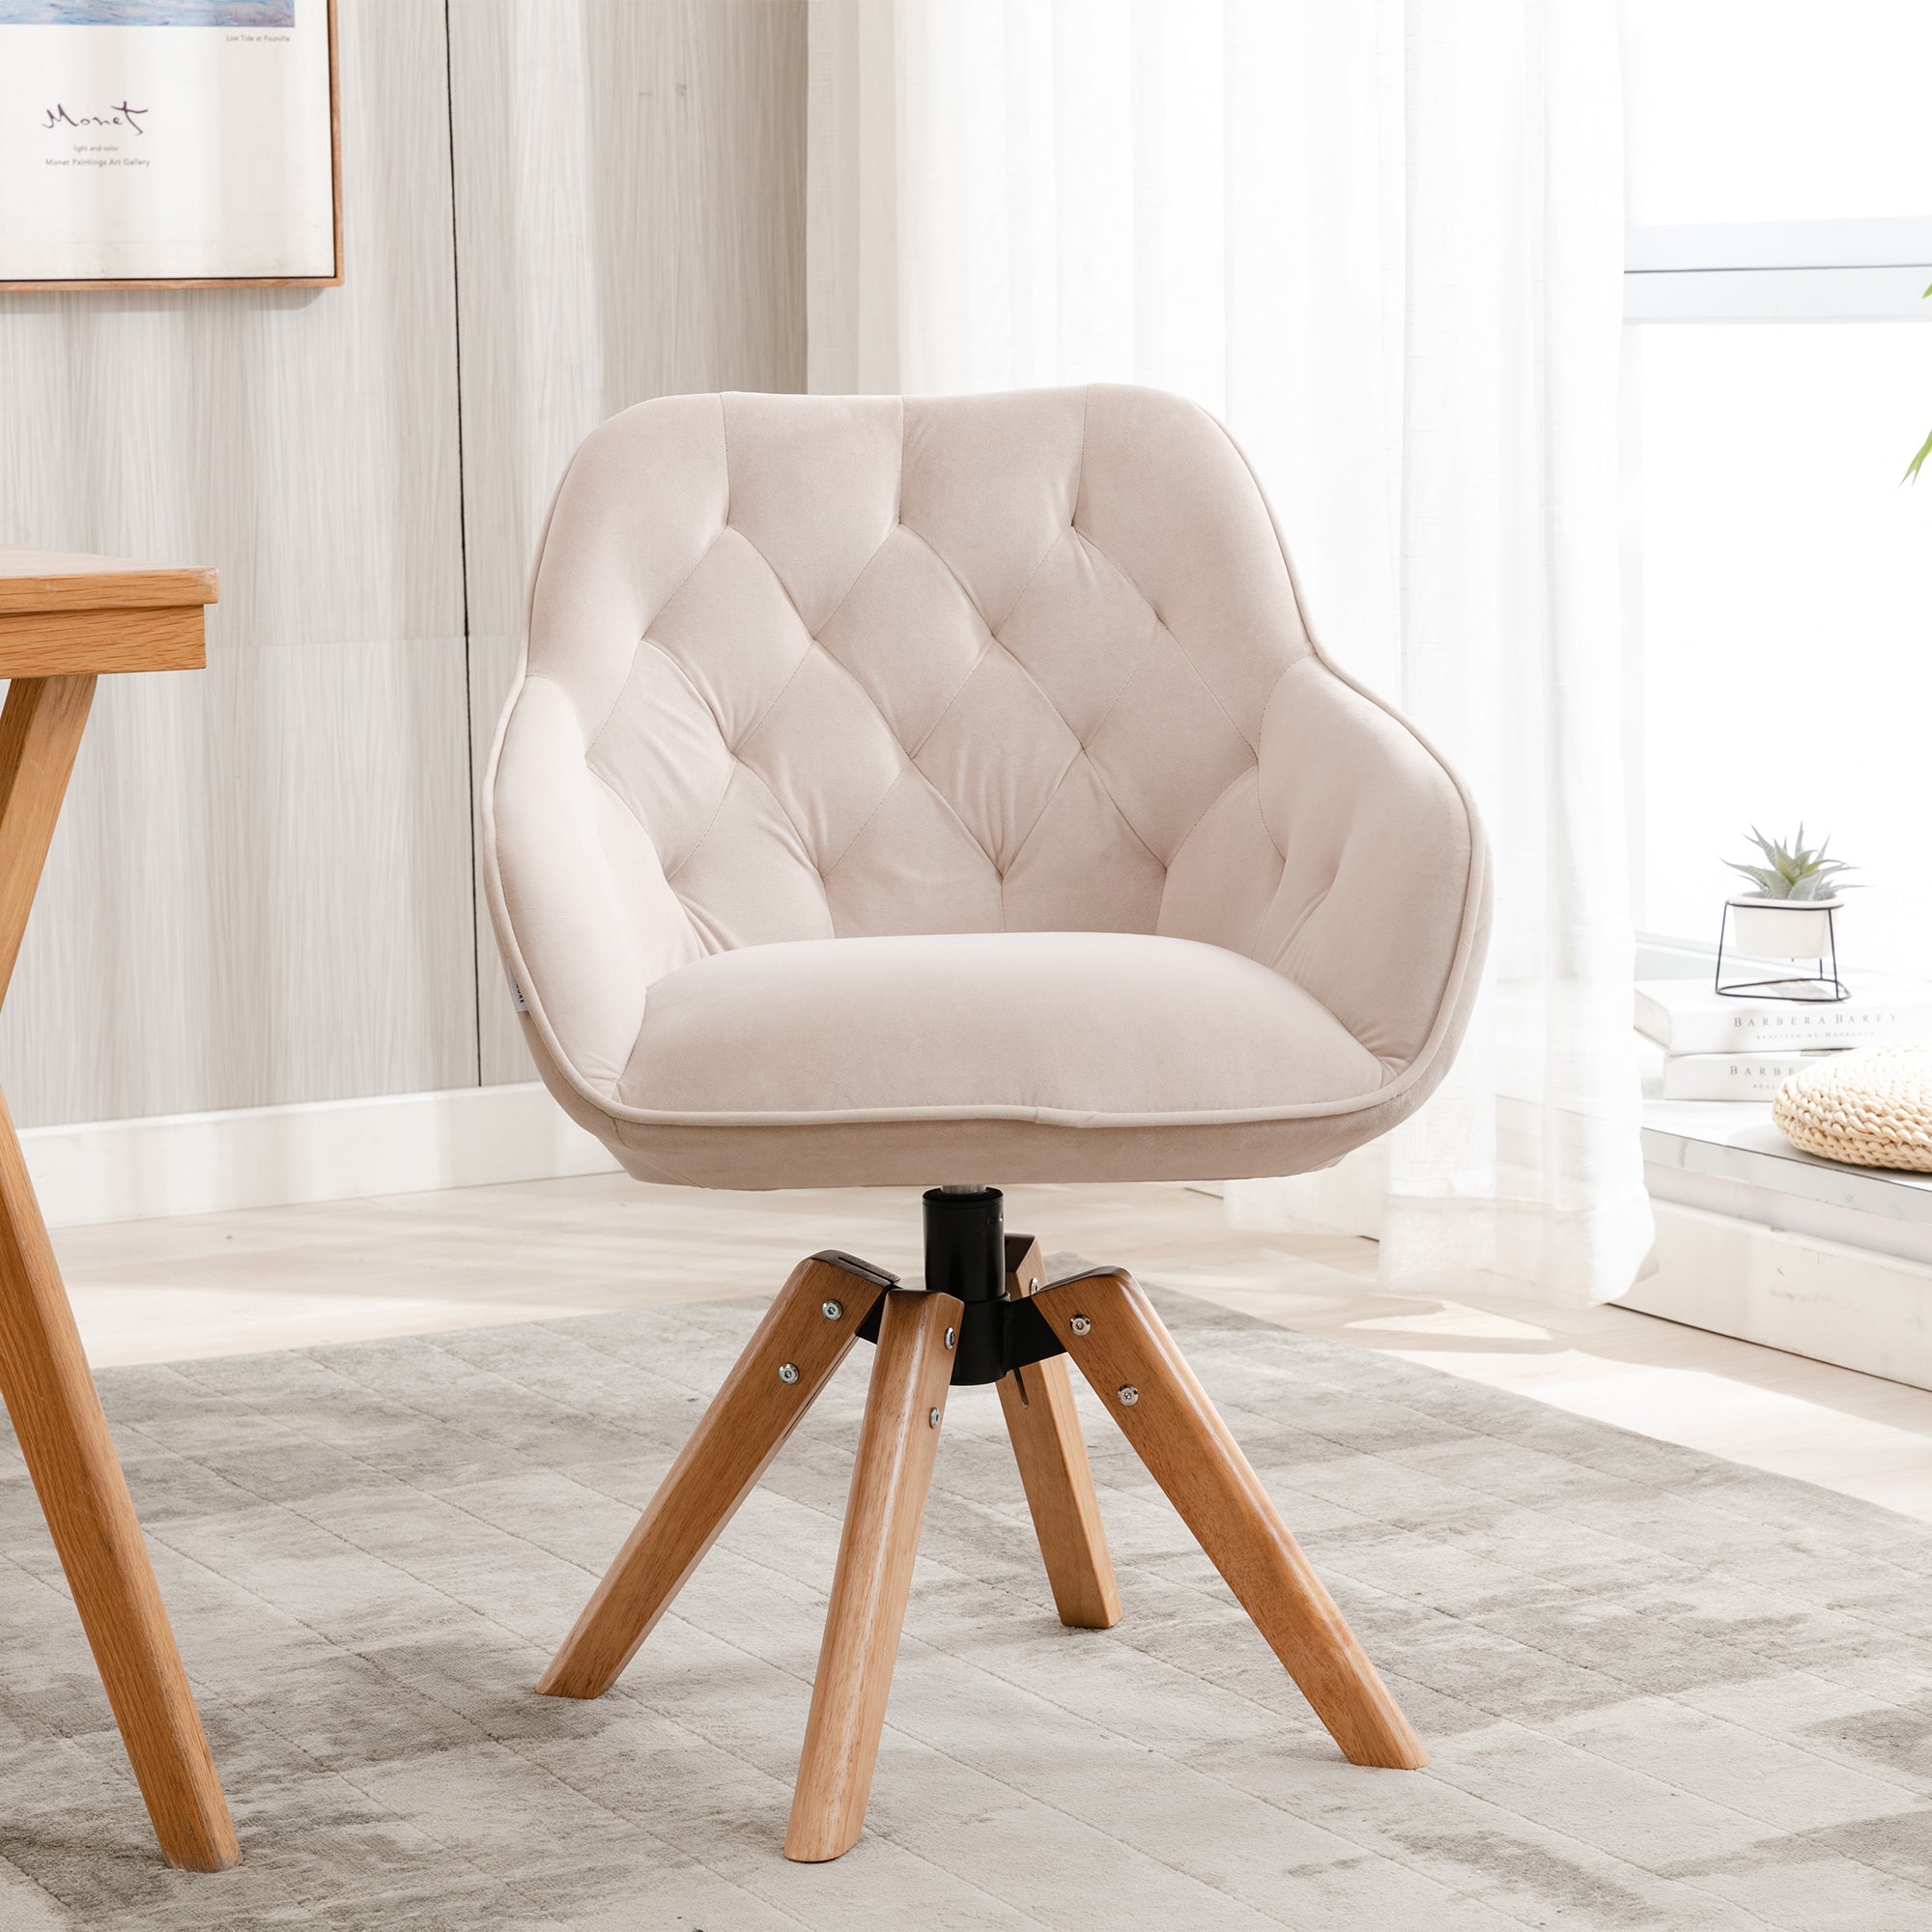 COOLMORE Solid Wood Home Office Chair